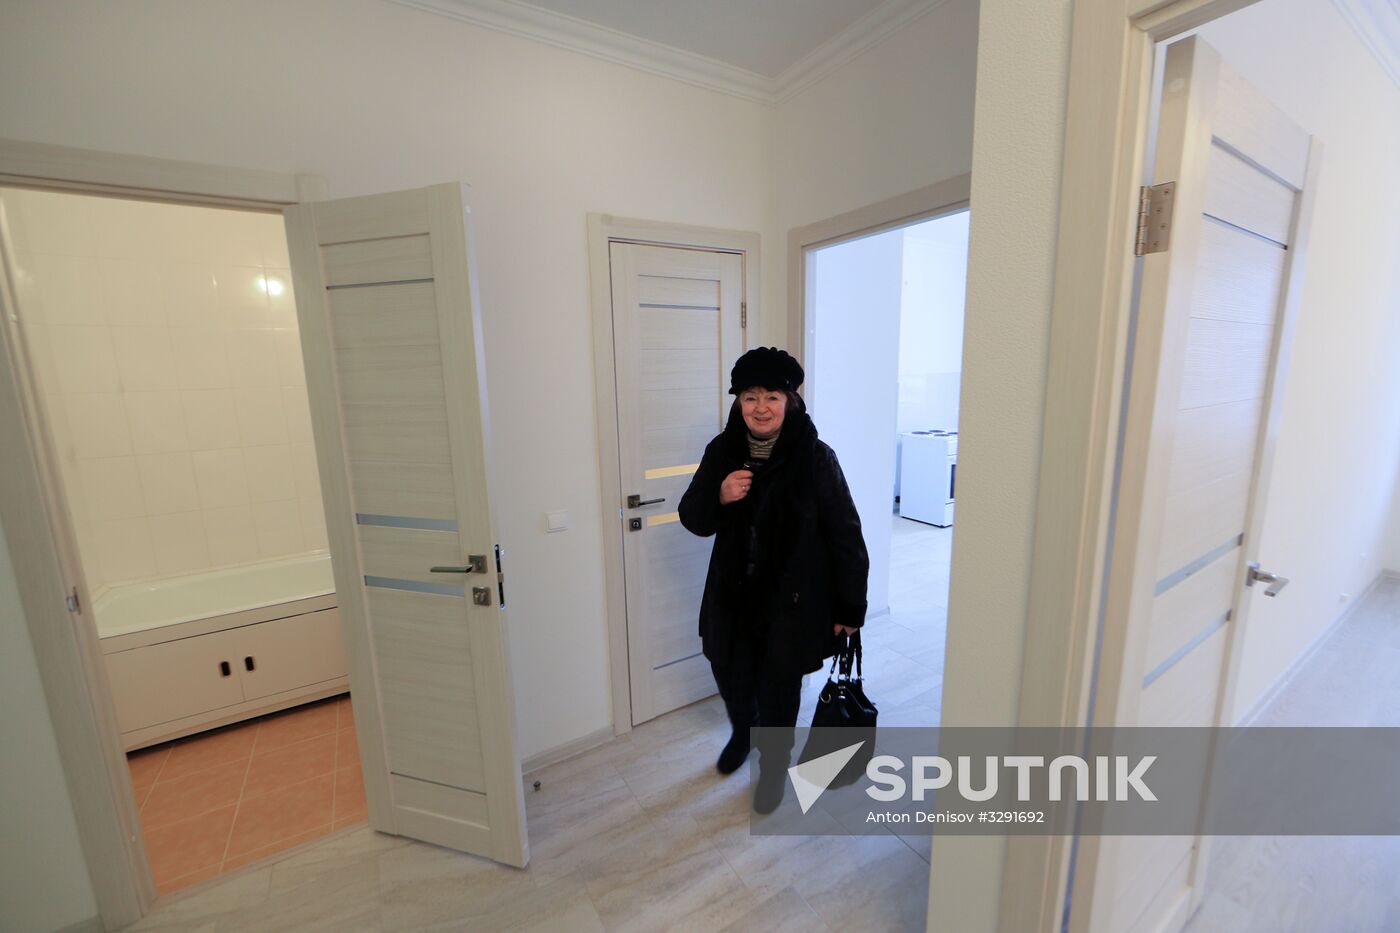 First apartment block built for Moscow's Relocation Program